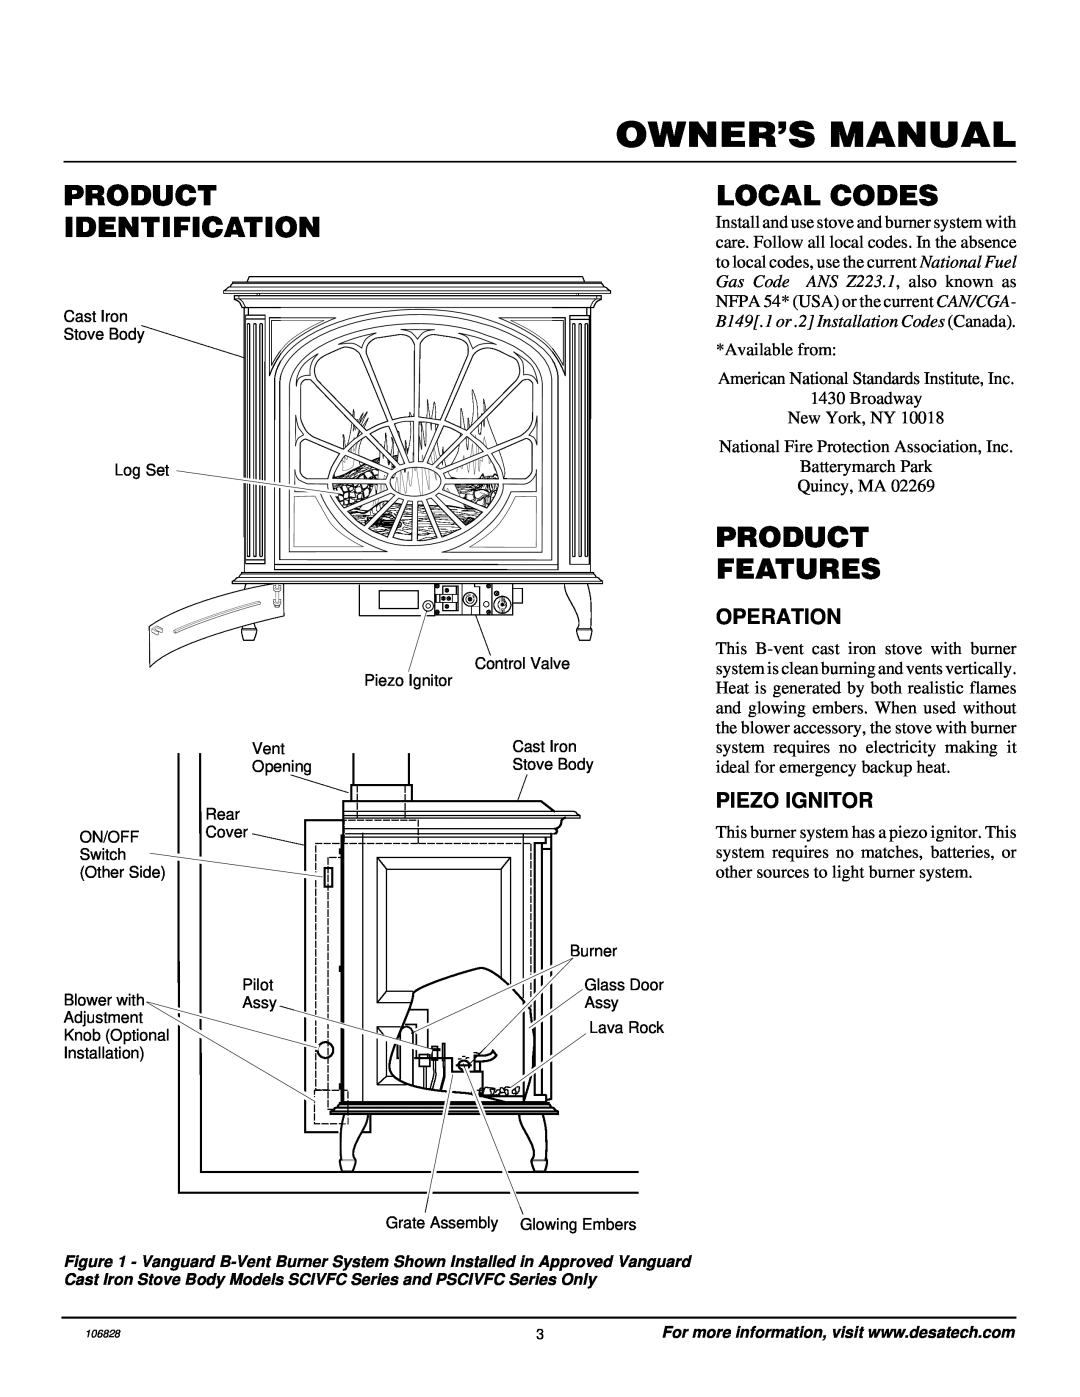 Vanguard Heating SBVBP(C) Owner’S Manual, Product Identification, Local Codes, Product Features, Operation, Piezo Ignitor 